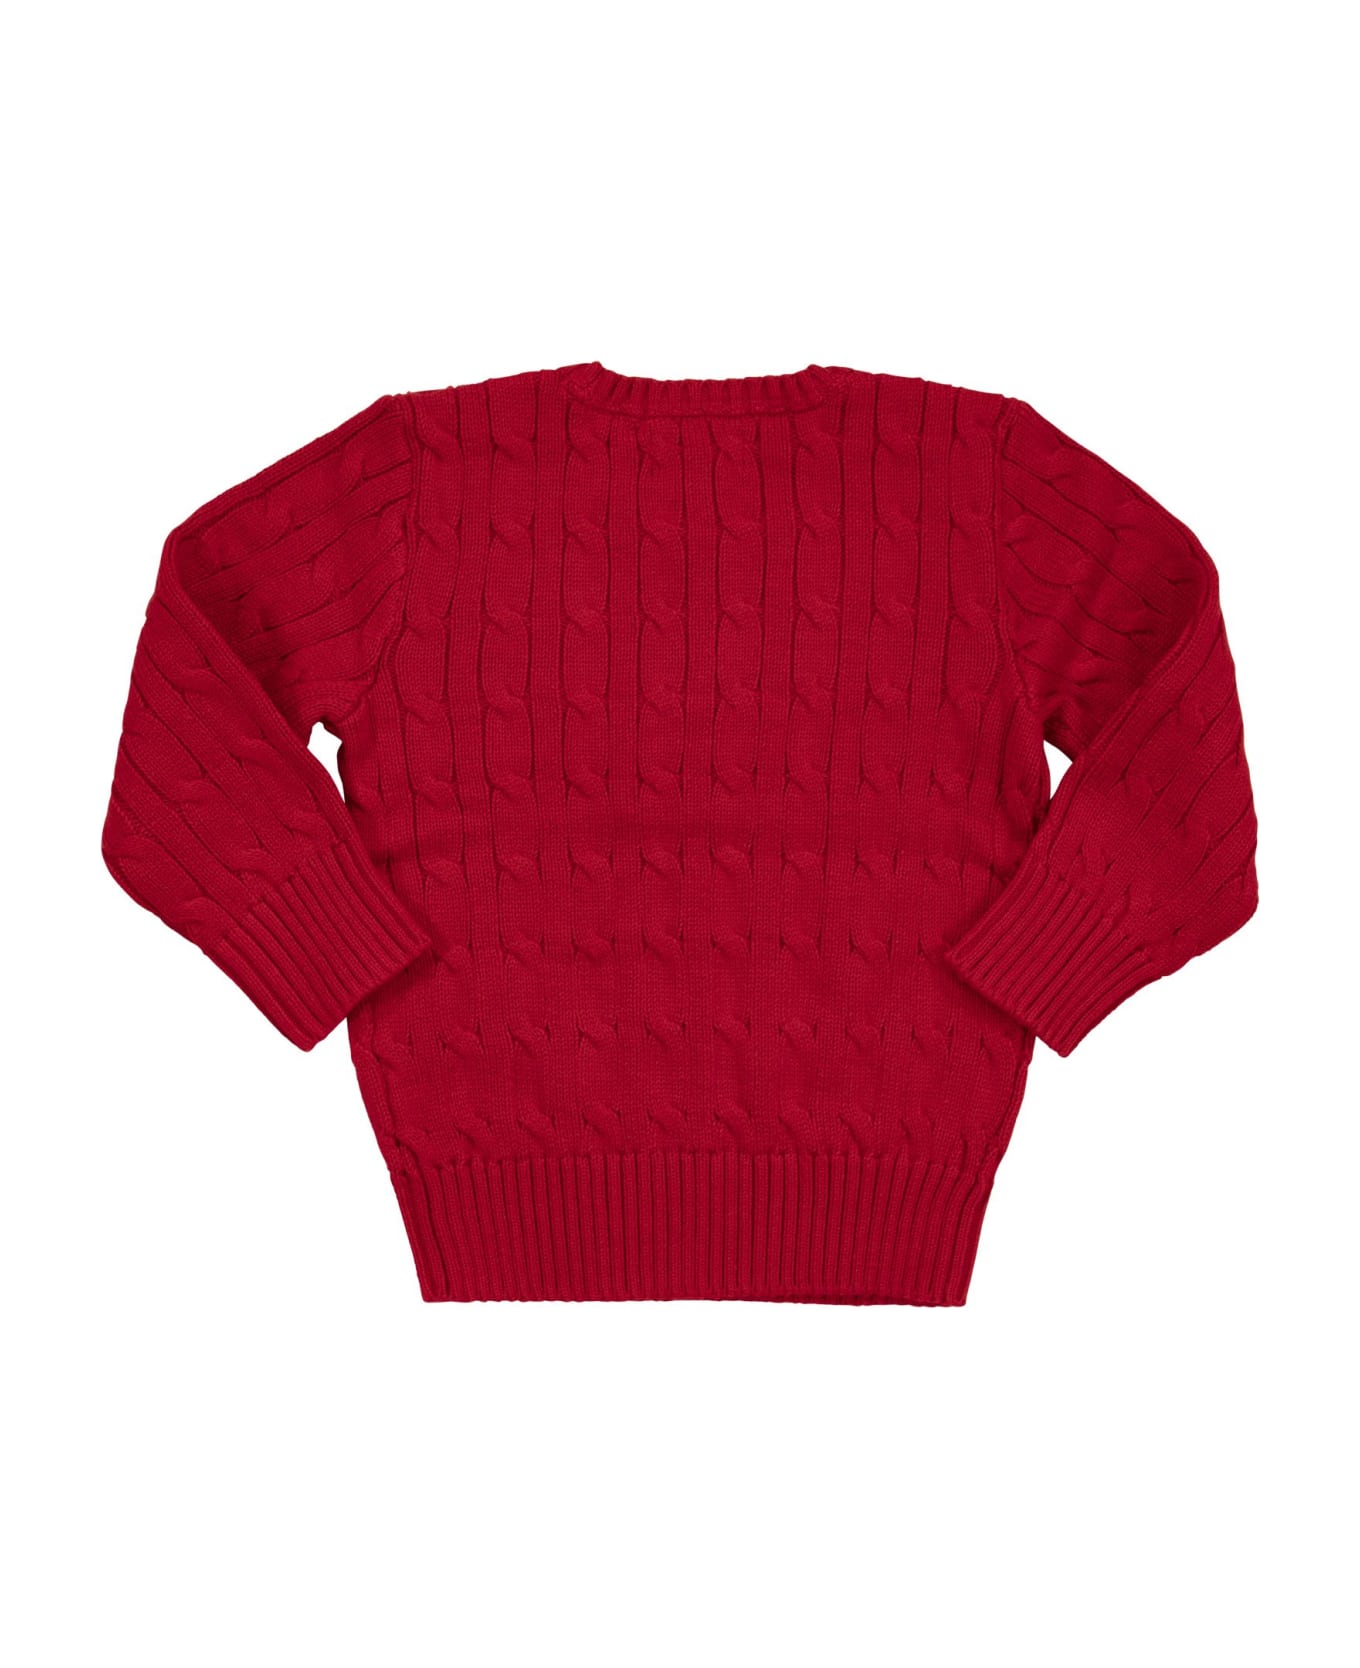 Polo Ralph Lauren Crew-neck Cotton Cable-knit Sweater - Red